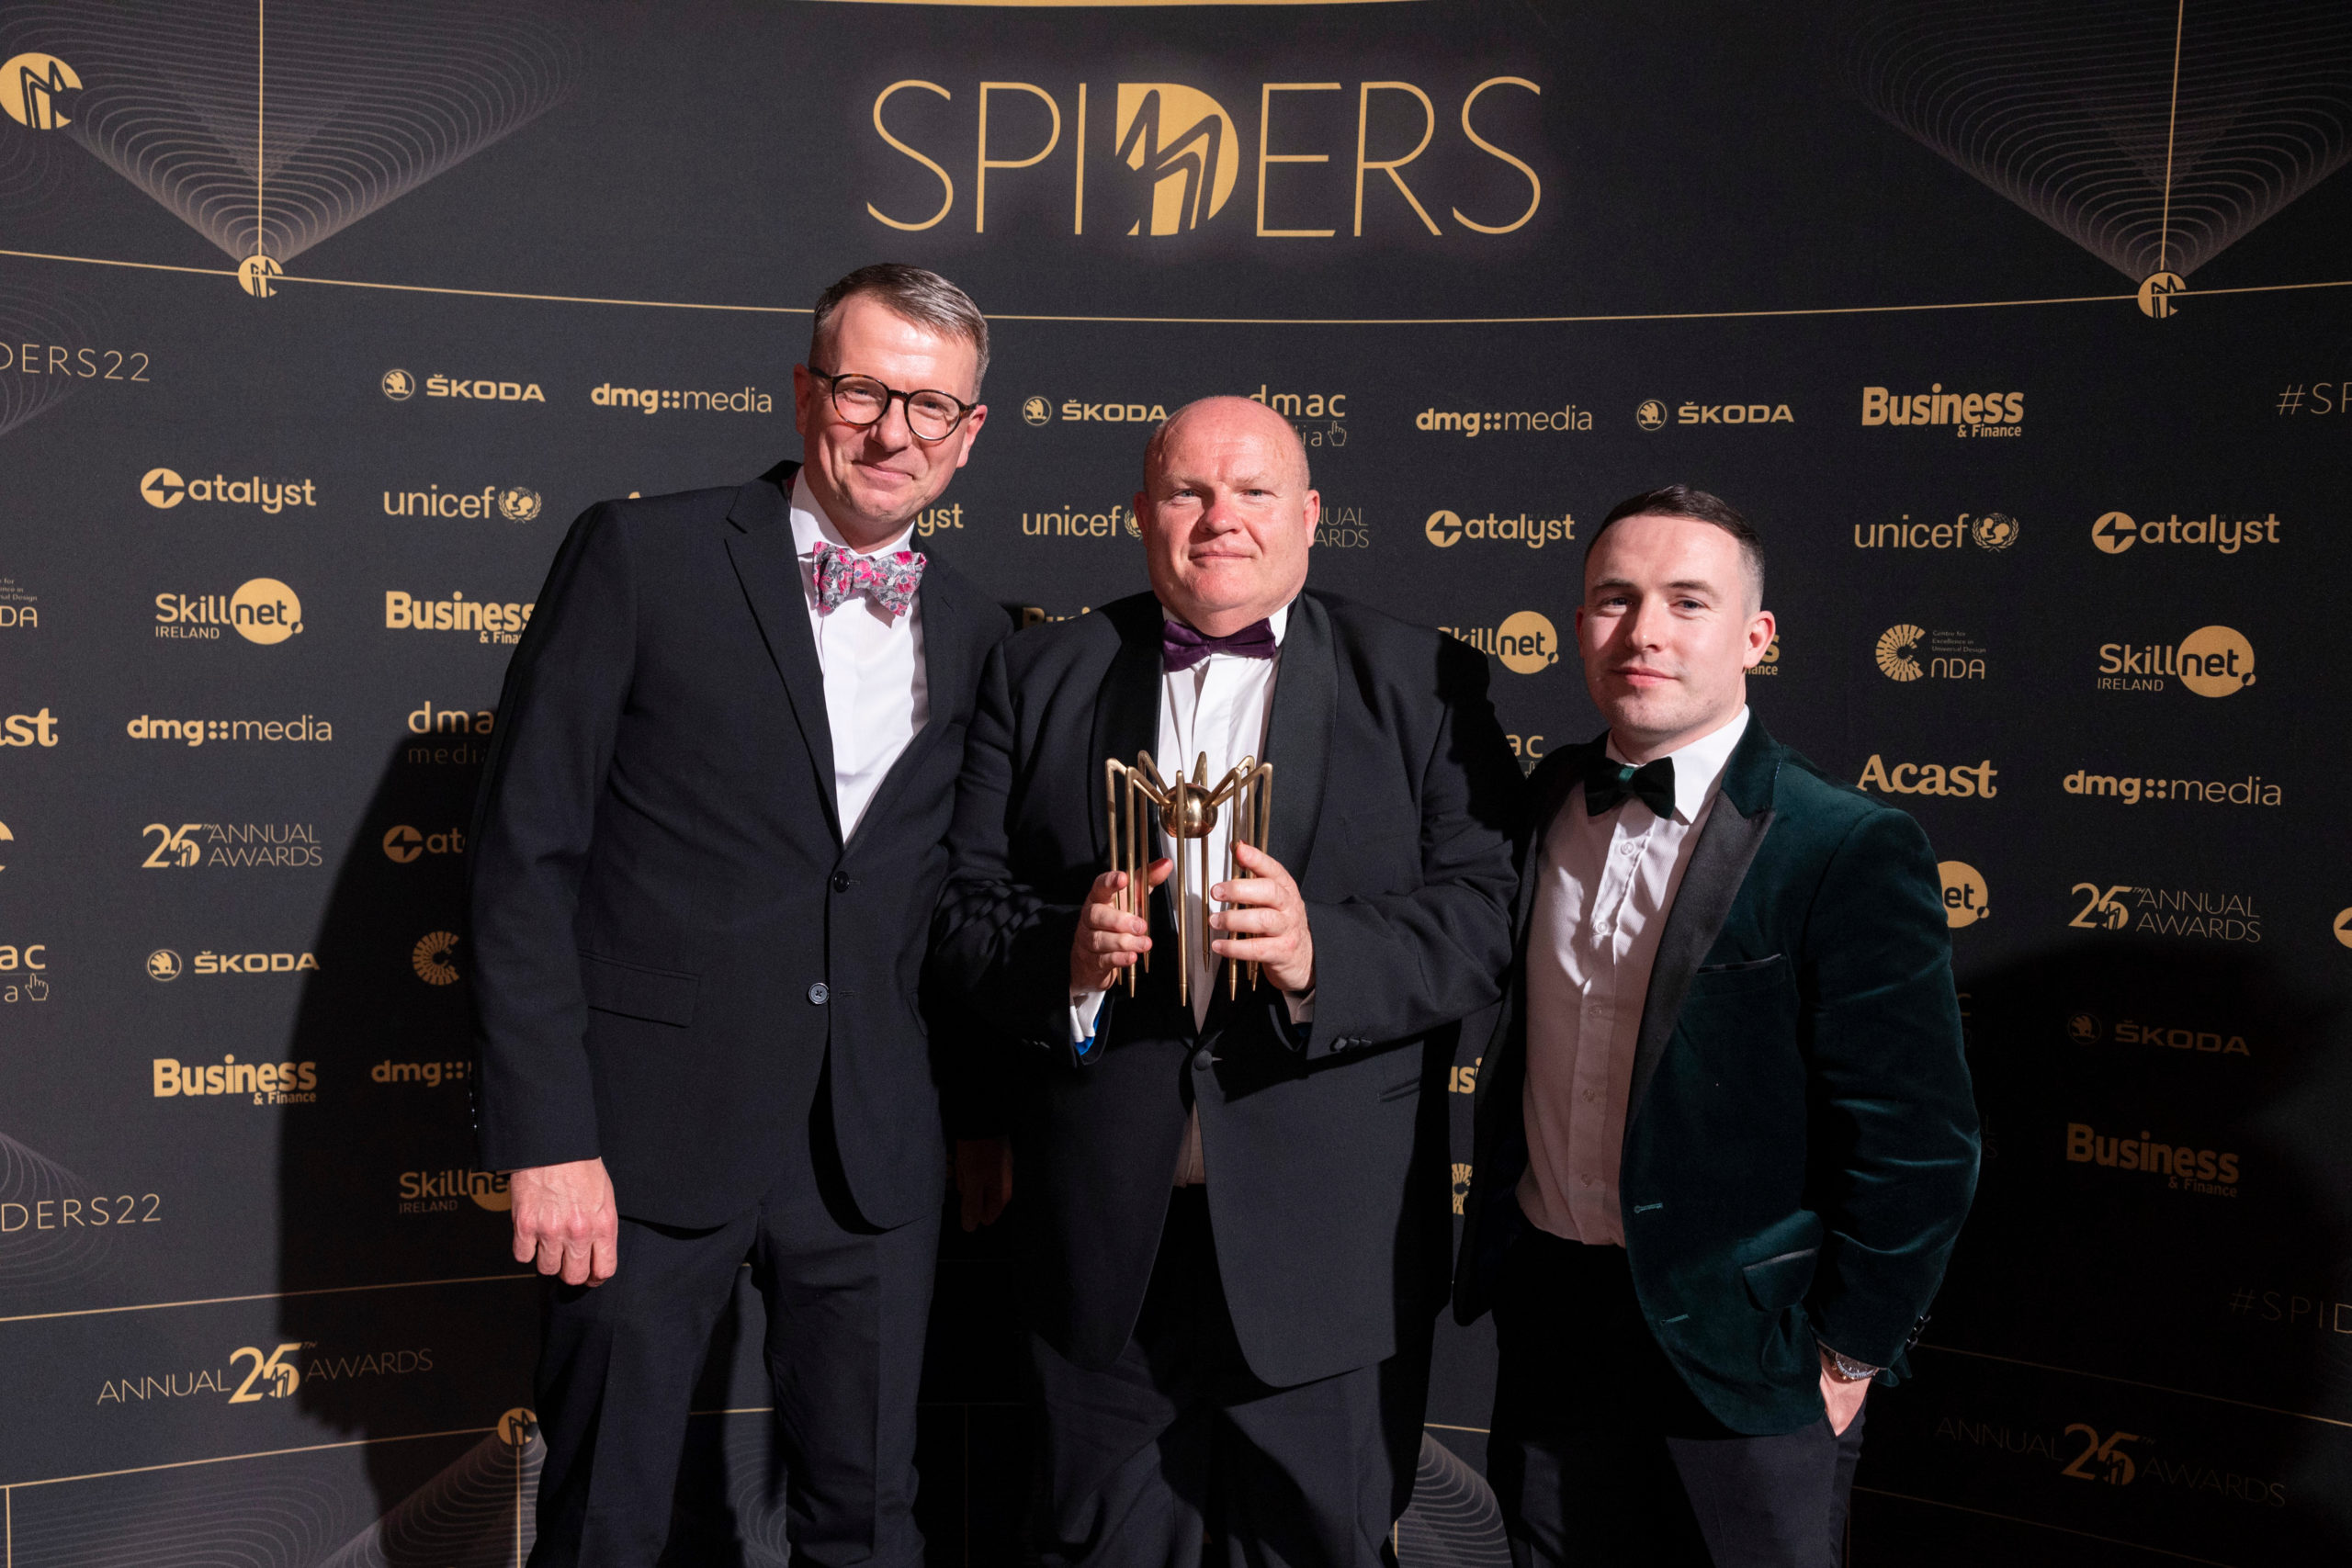 Winners of ‘Best in Universal Design’ at the 2022 Spider Awards